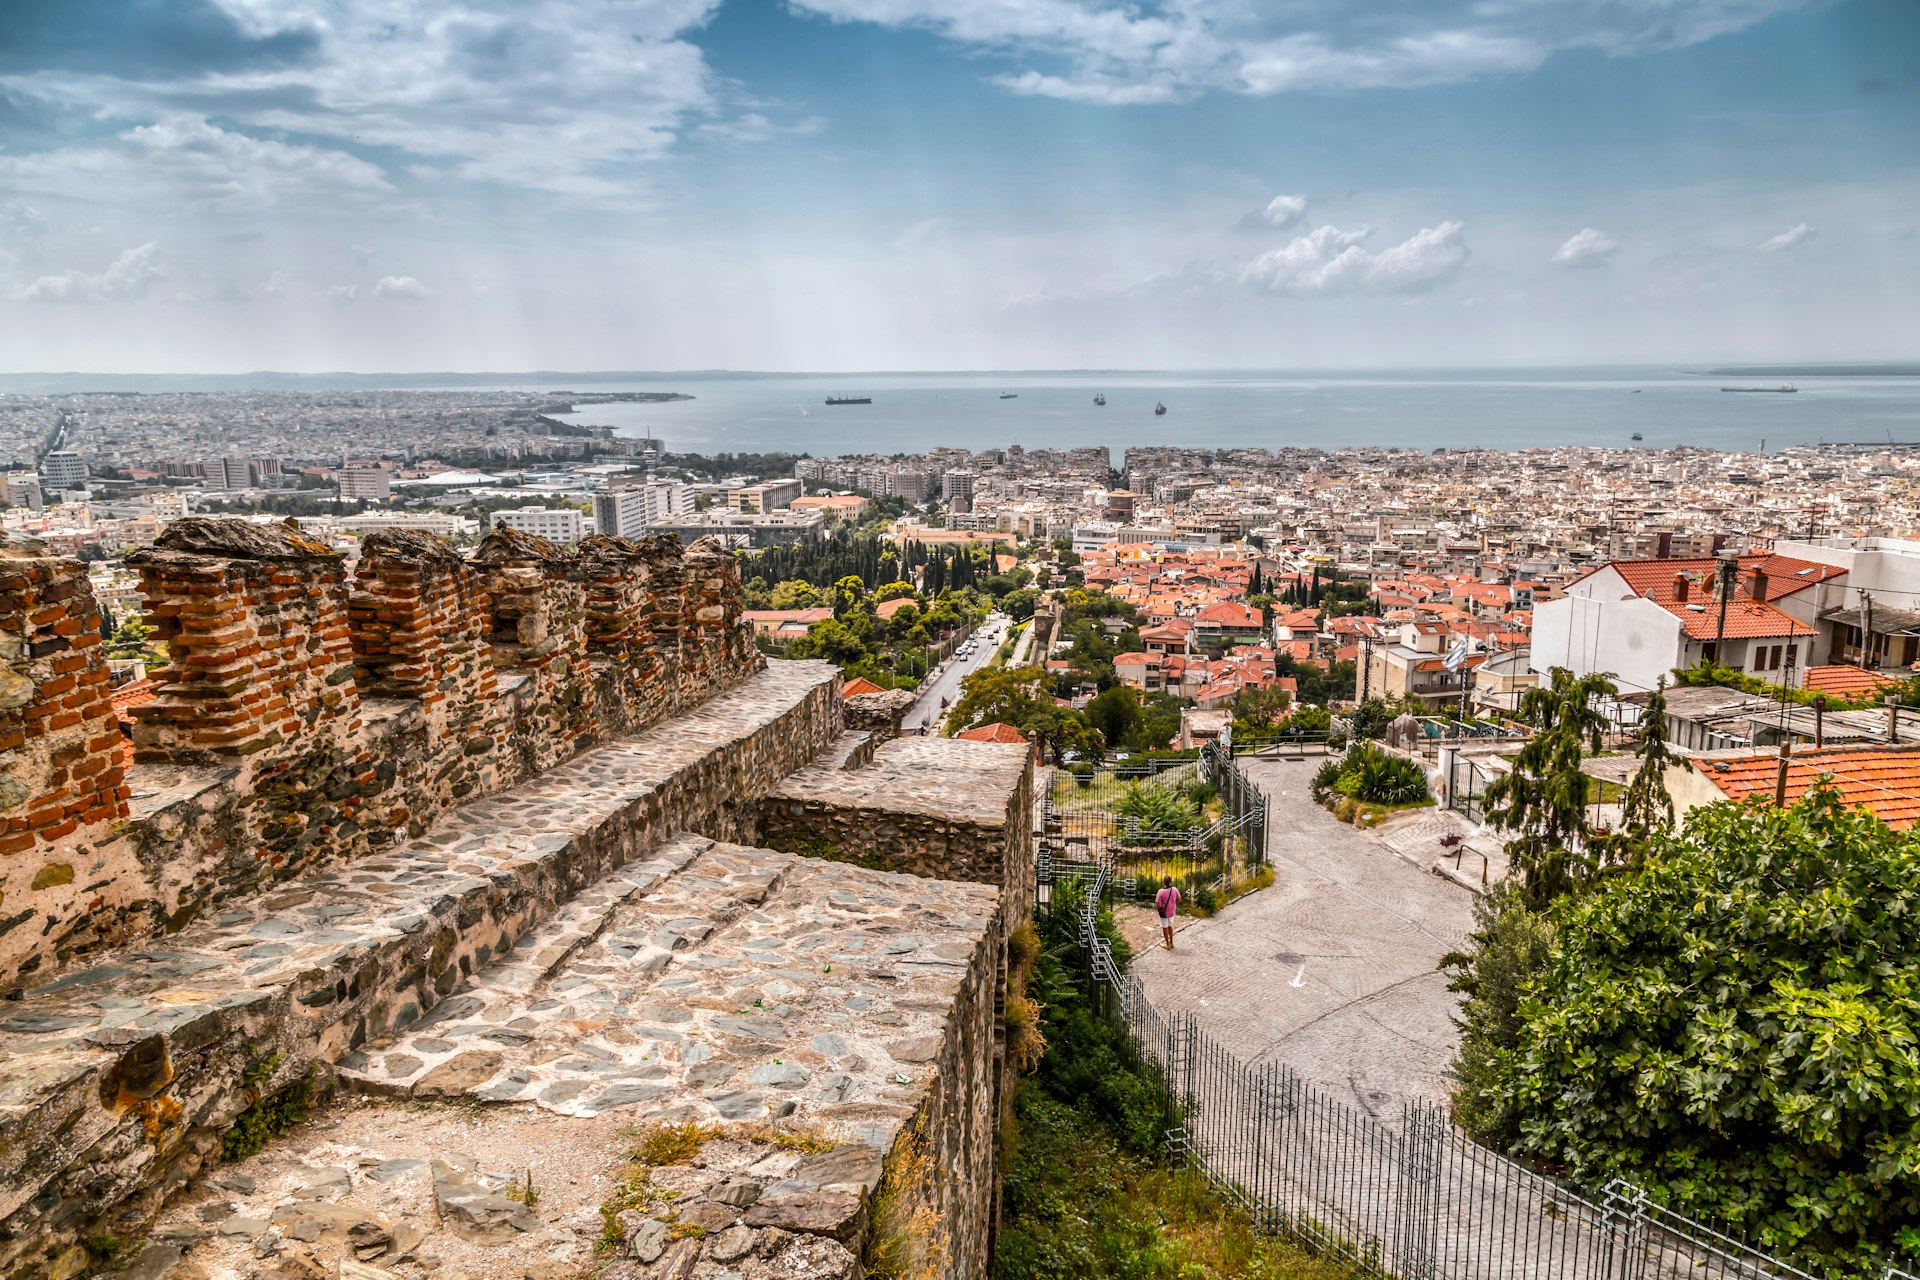 The view from the ancient walls of the castle and Trigonion Tower in the Ano Poli (old city), Thessaloniki, Macedonia Greece